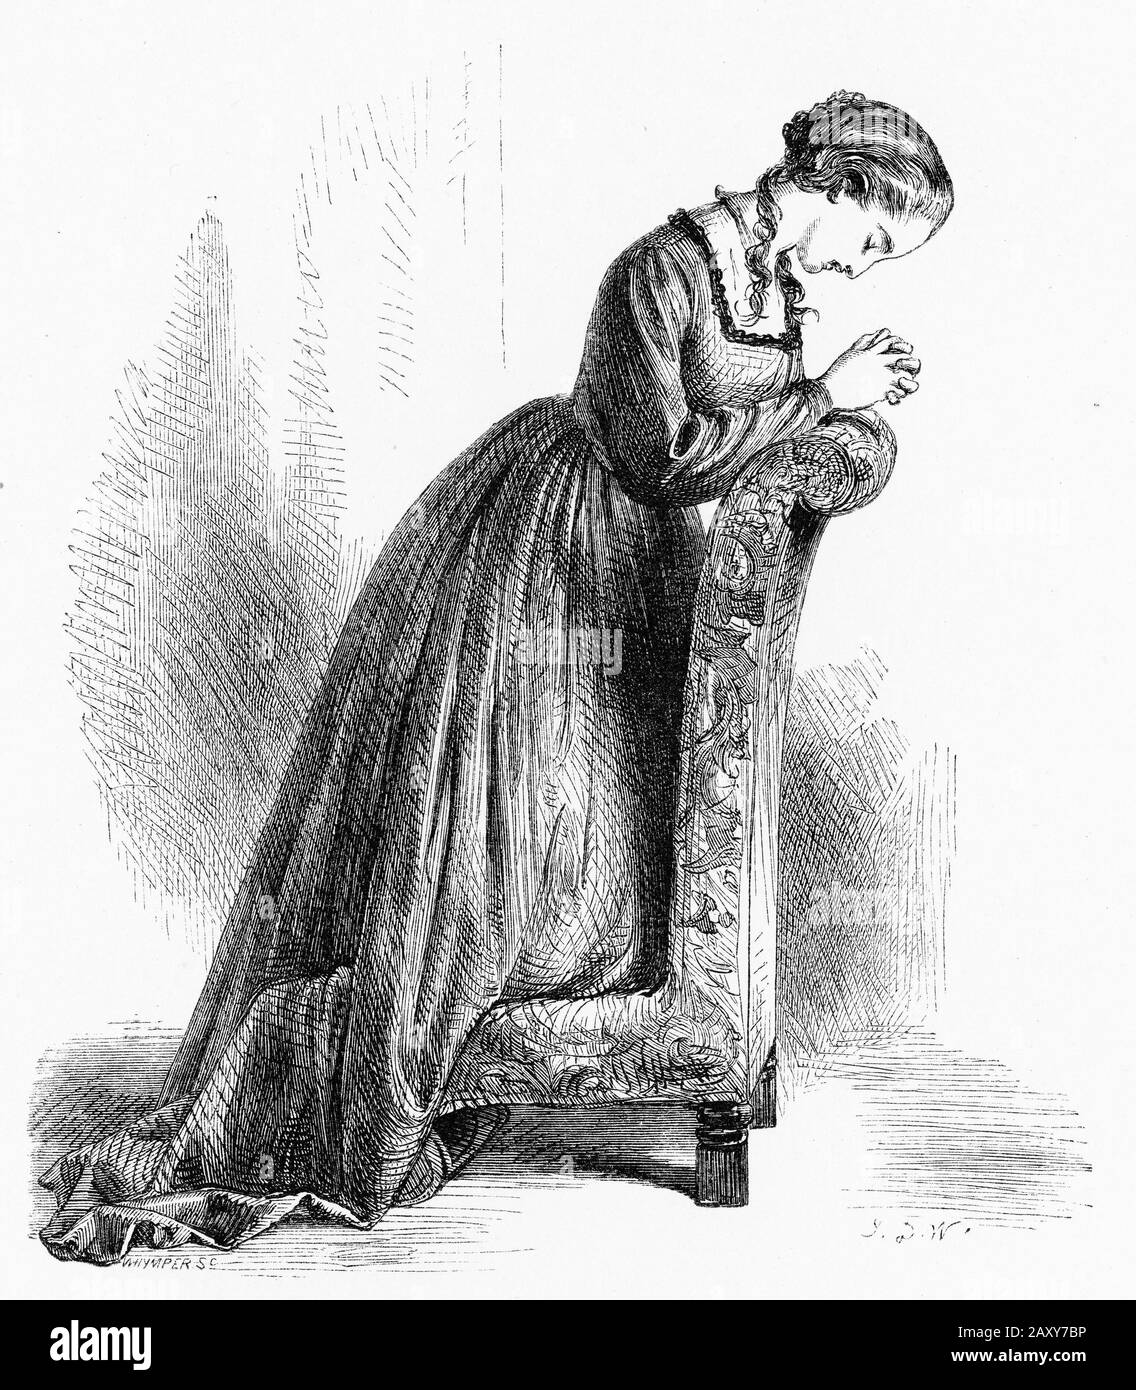 Engraved portrait of a woman praying Stock Photo